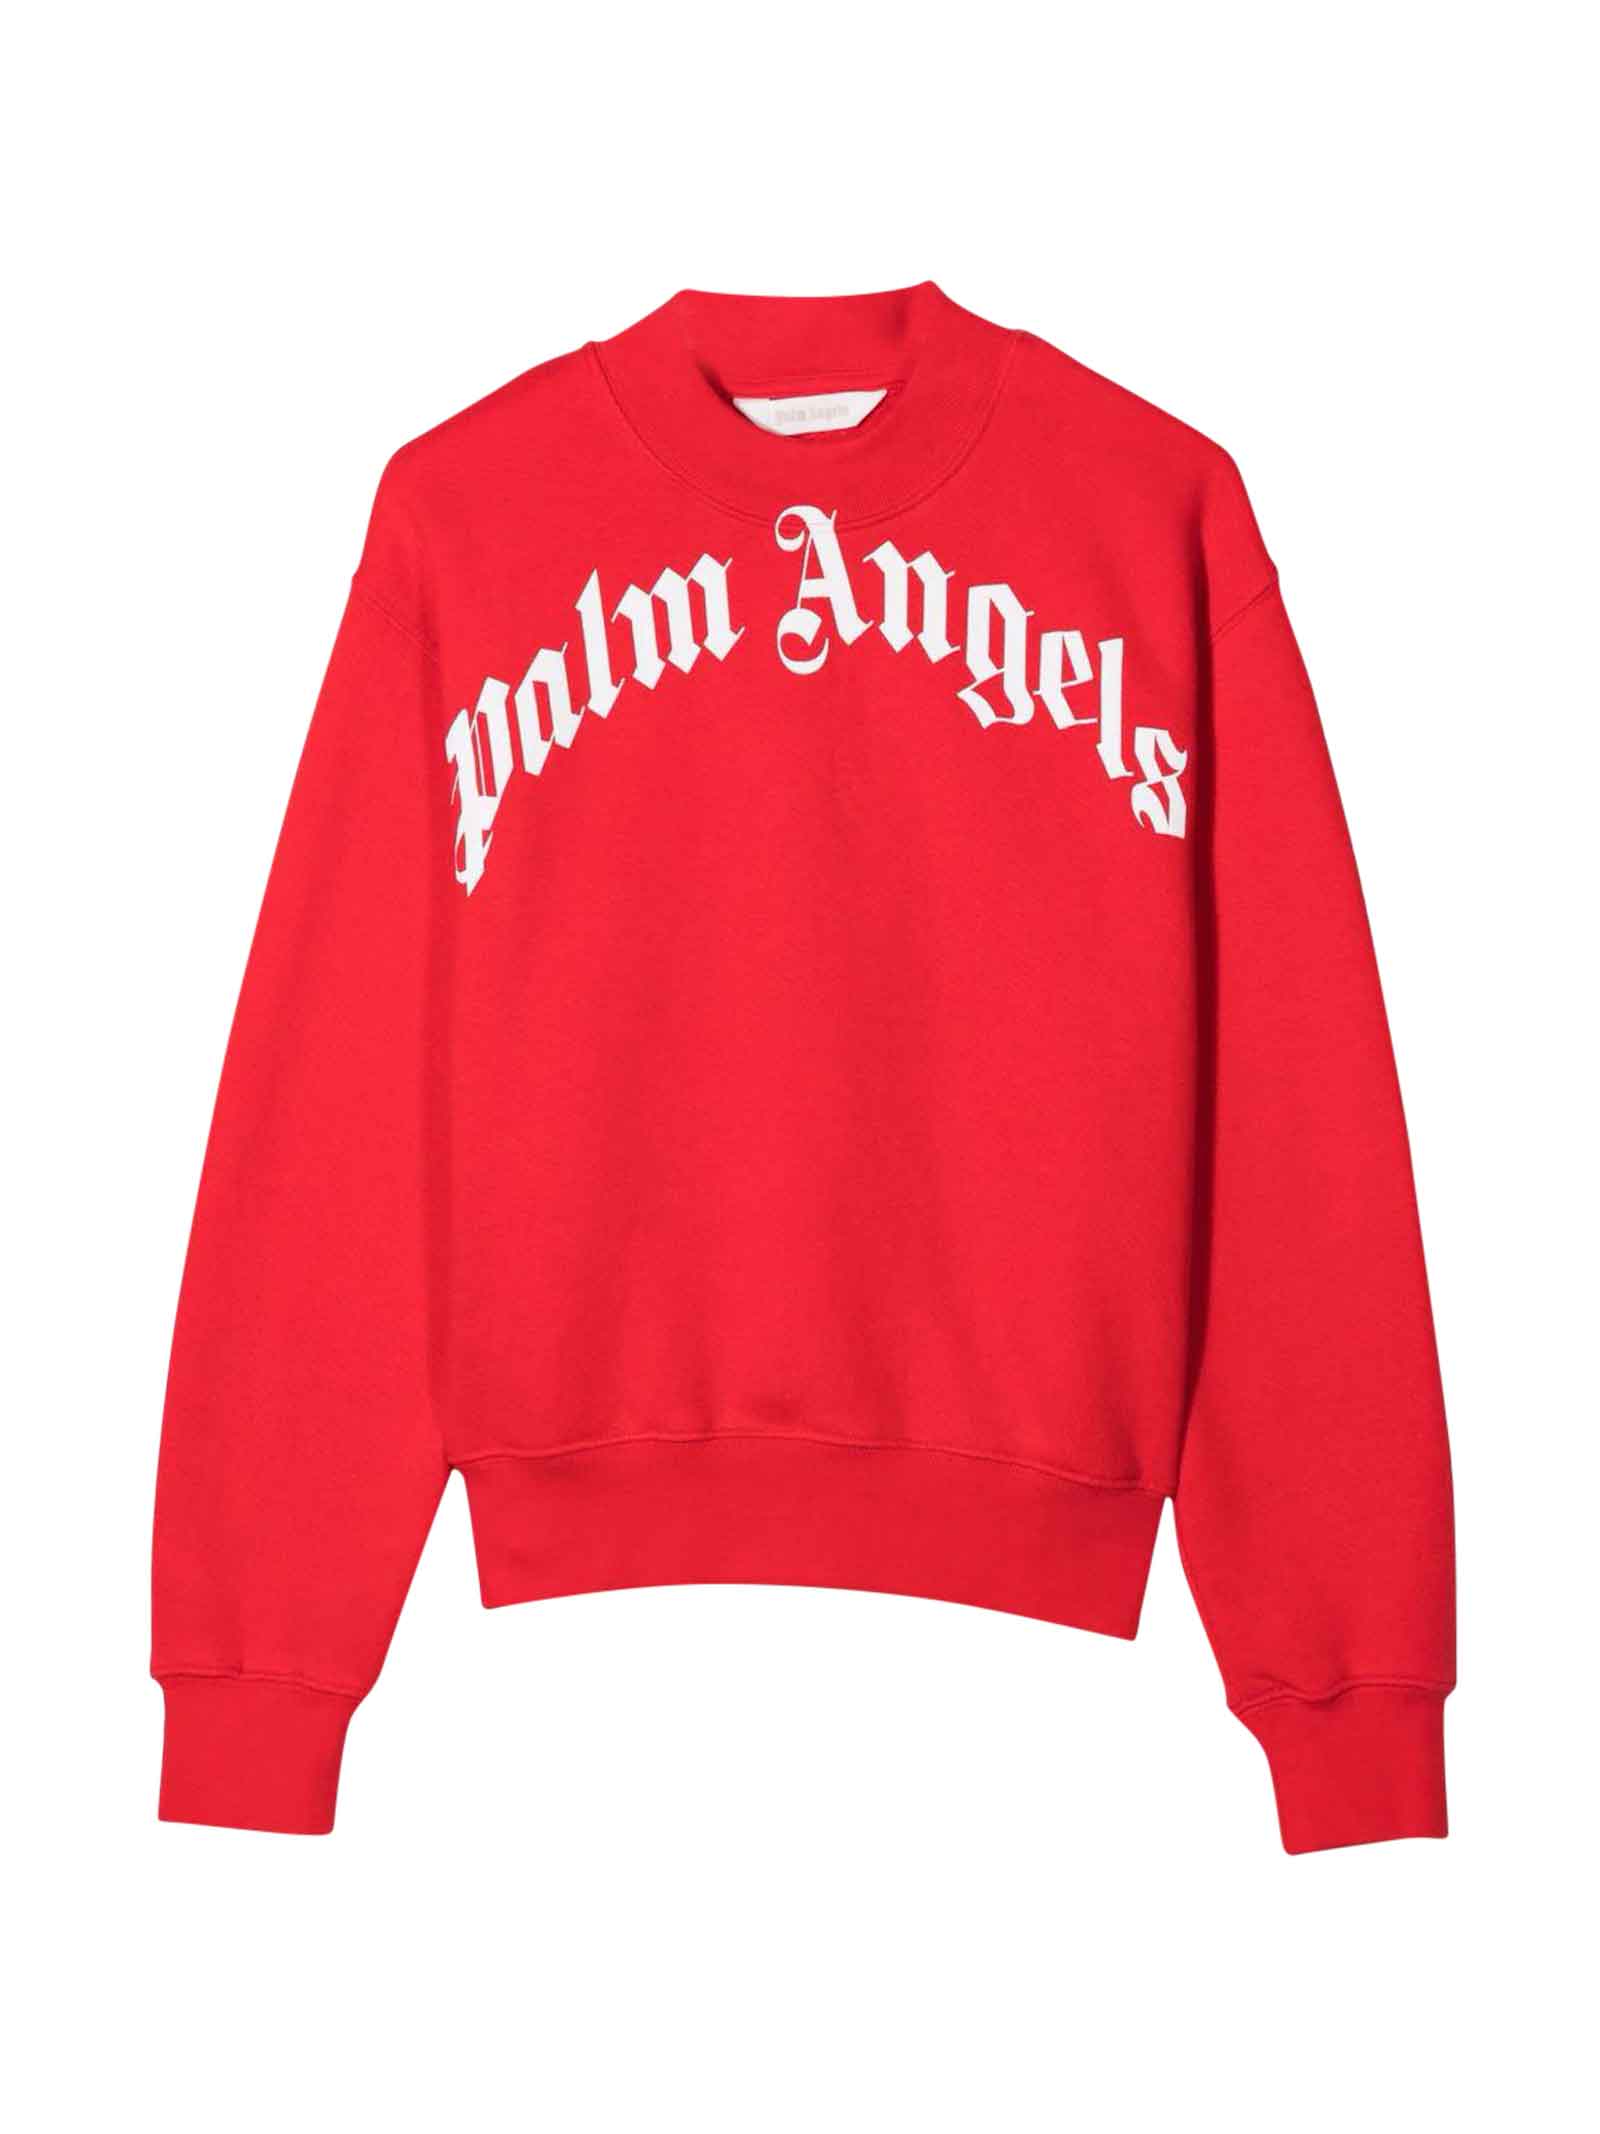 Palm Angels Red Sweatshirt With White Print